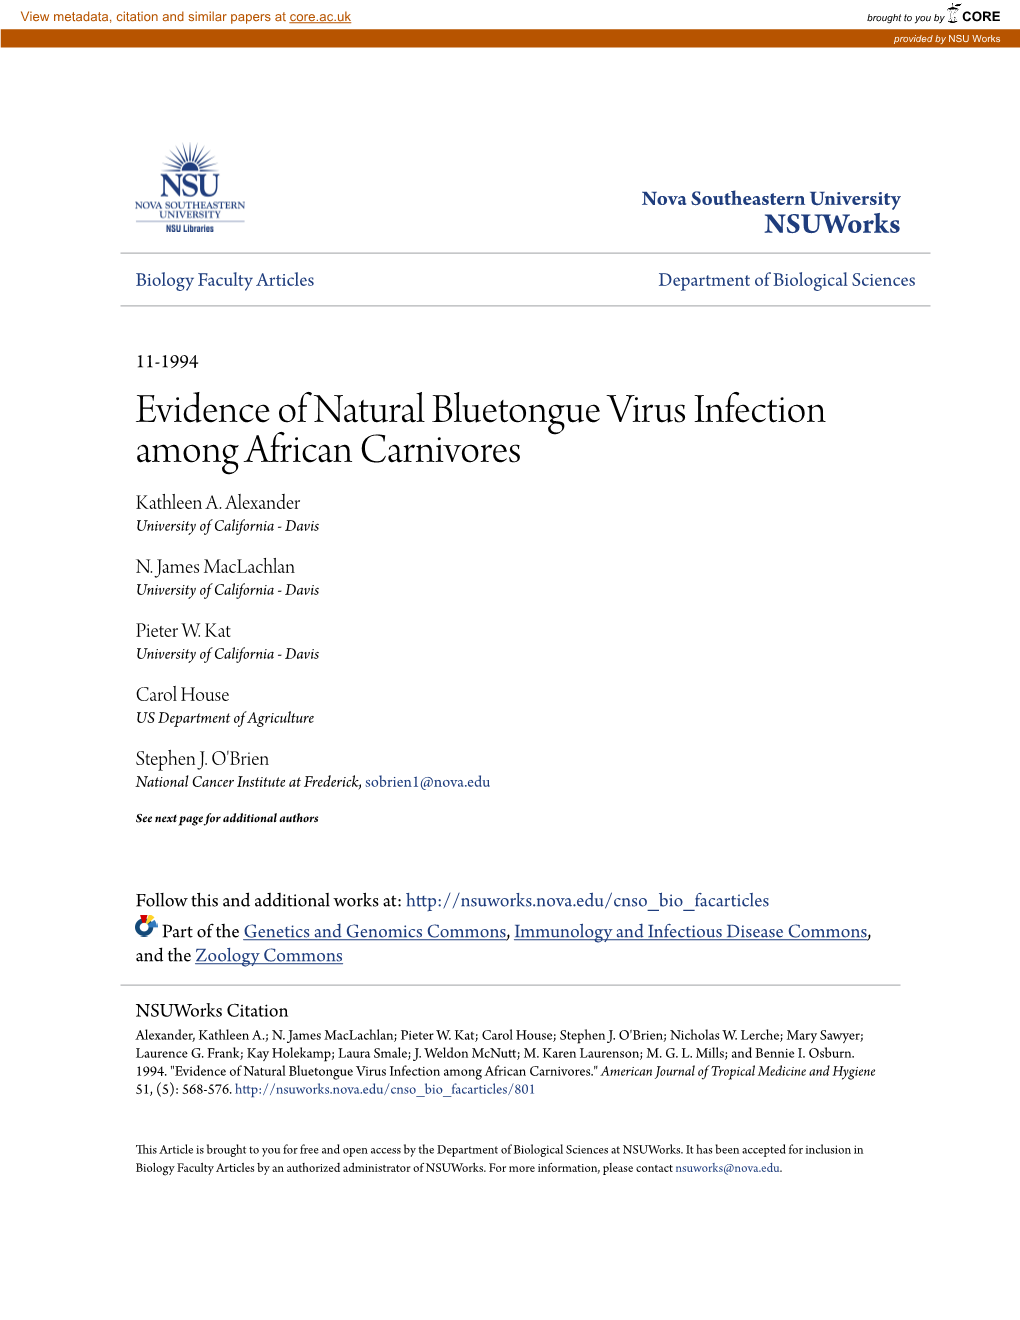 Evidence of Natural Bluetongue Virus Infection Among African Carnivores Kathleen A